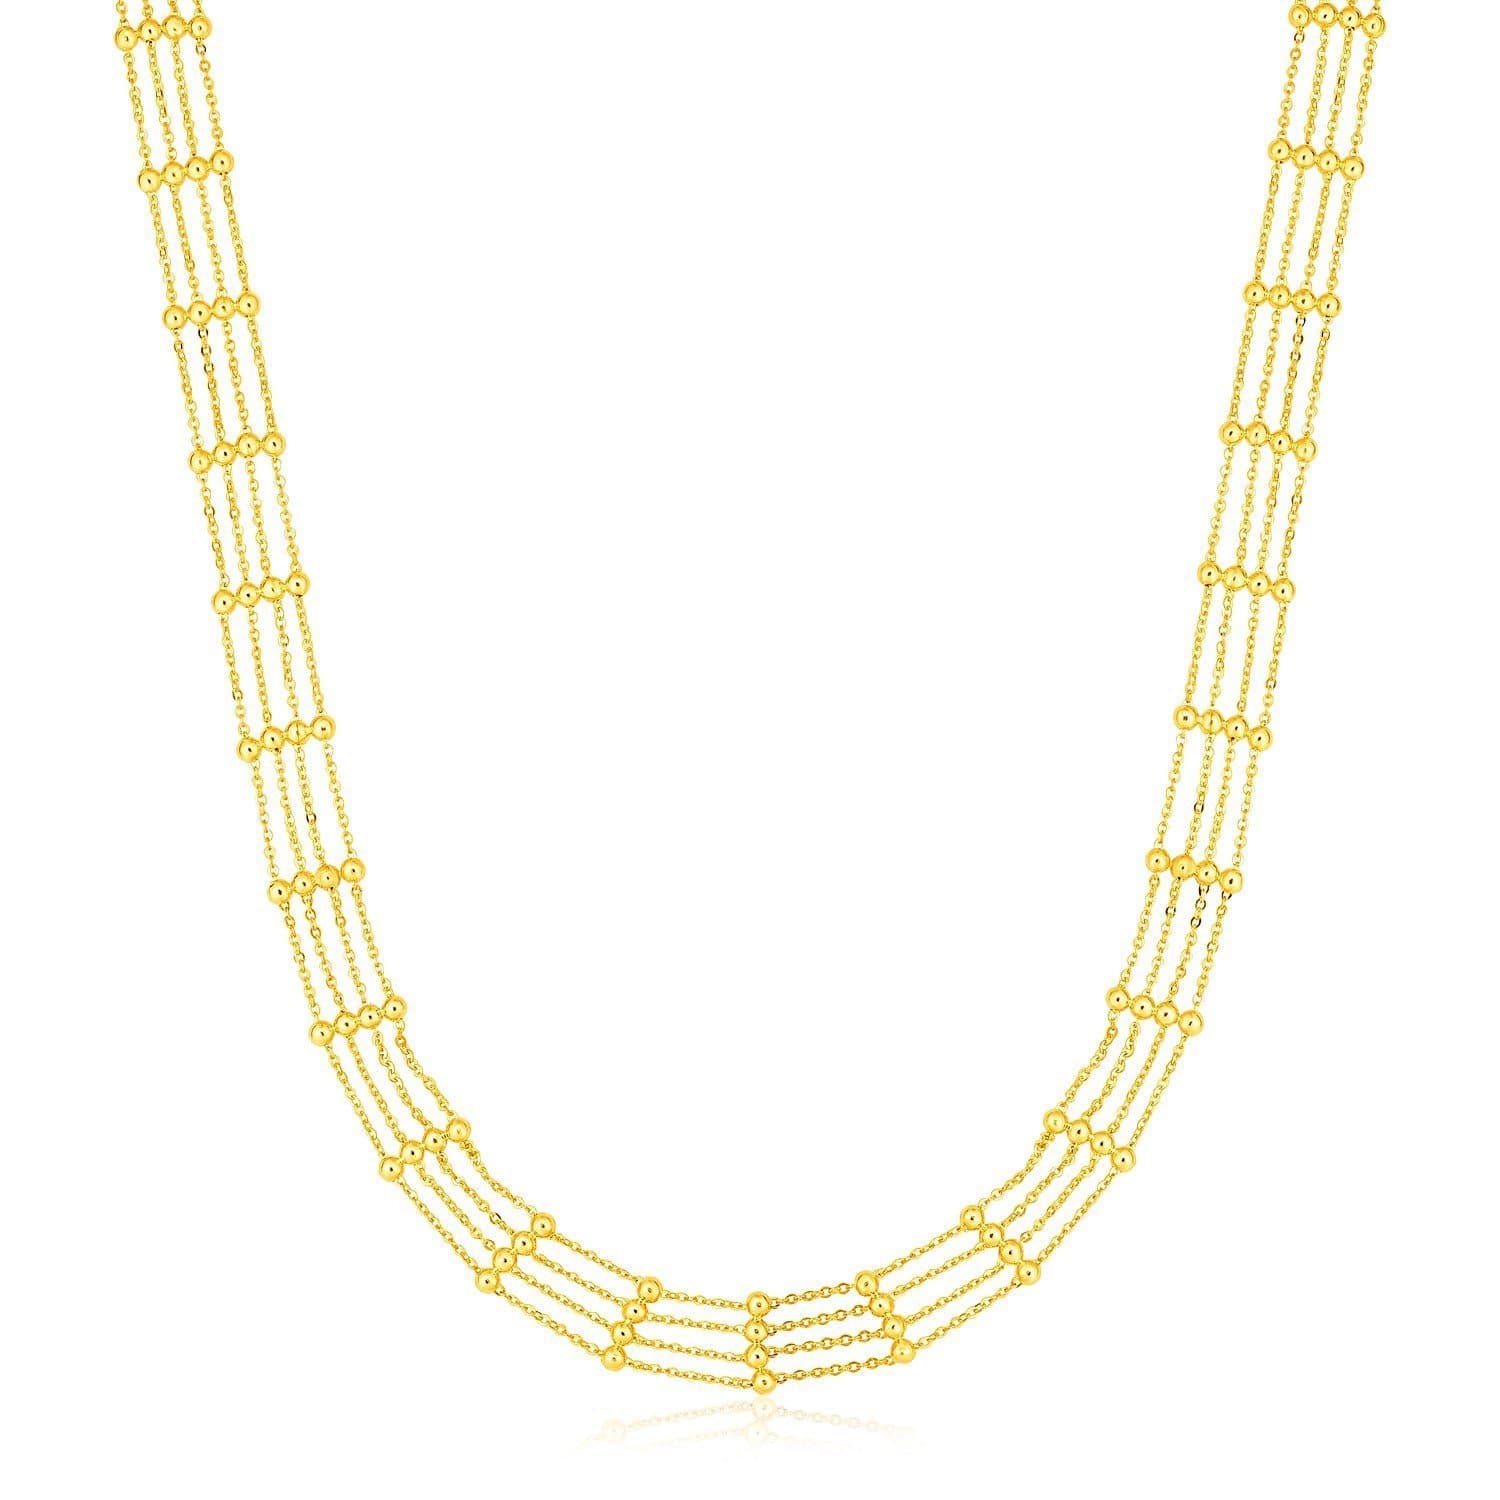 14k Yellow Gold Choker Necklace with Polished Beads